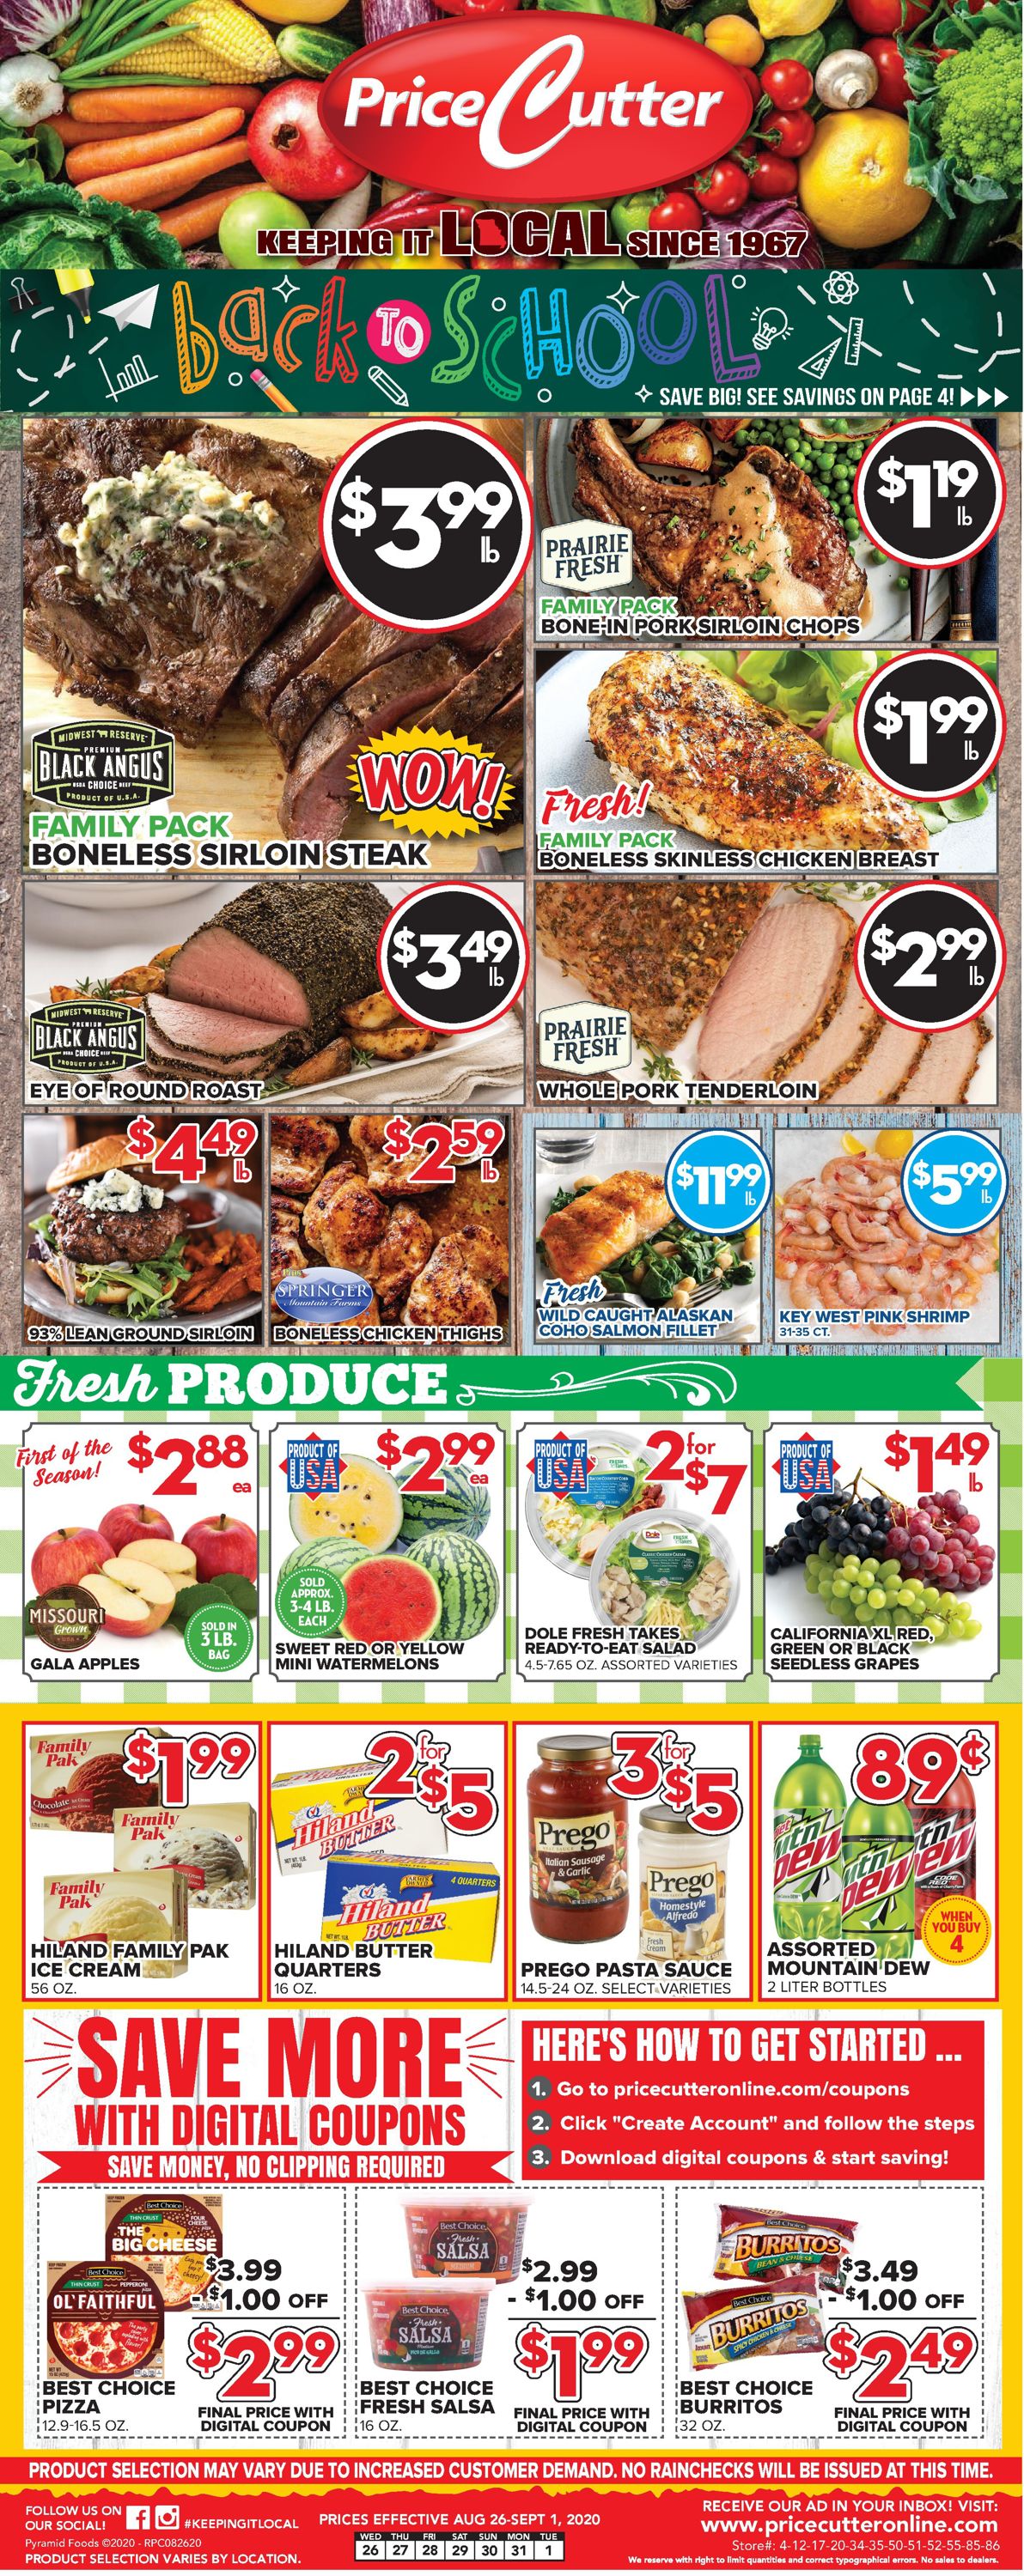 Price Cutter Weekly Ad Circular - valid 08/26-09/01/2020